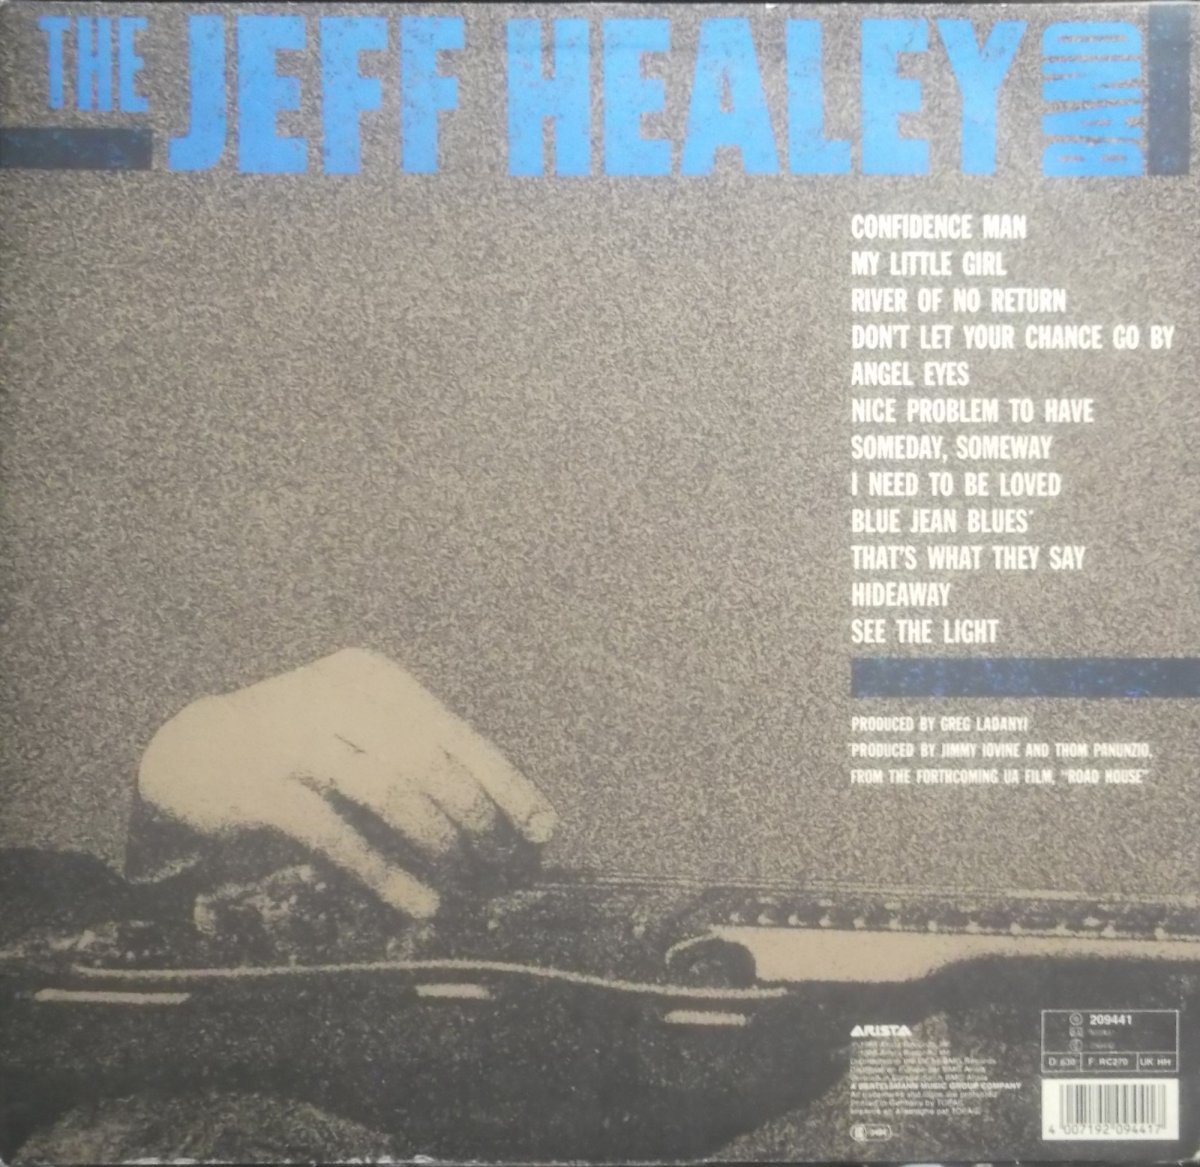 The Jeff Healey Band – See The Light 